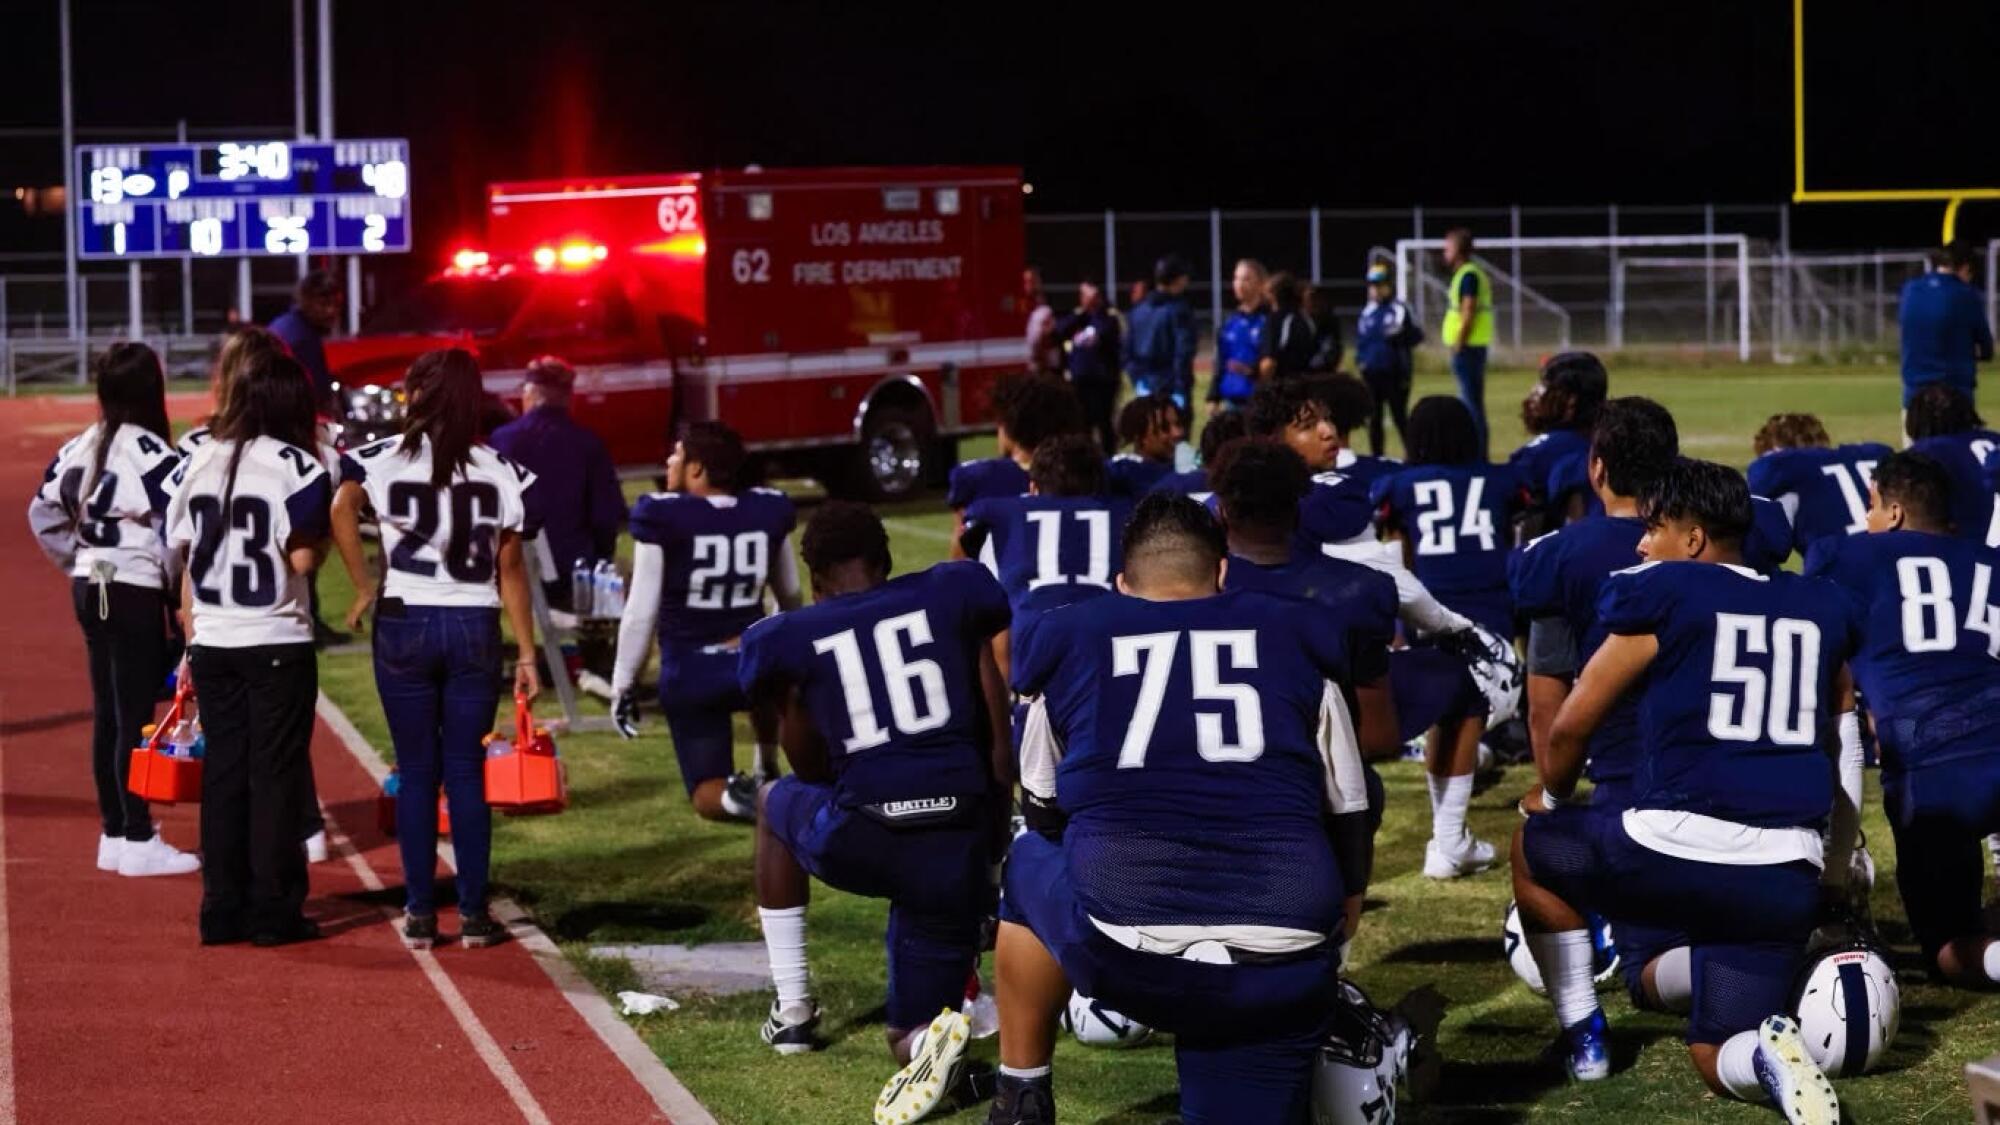 Varsity football players from Venice and Edison watch the ambulance carrying Nathan Santa Cruz exit the field.